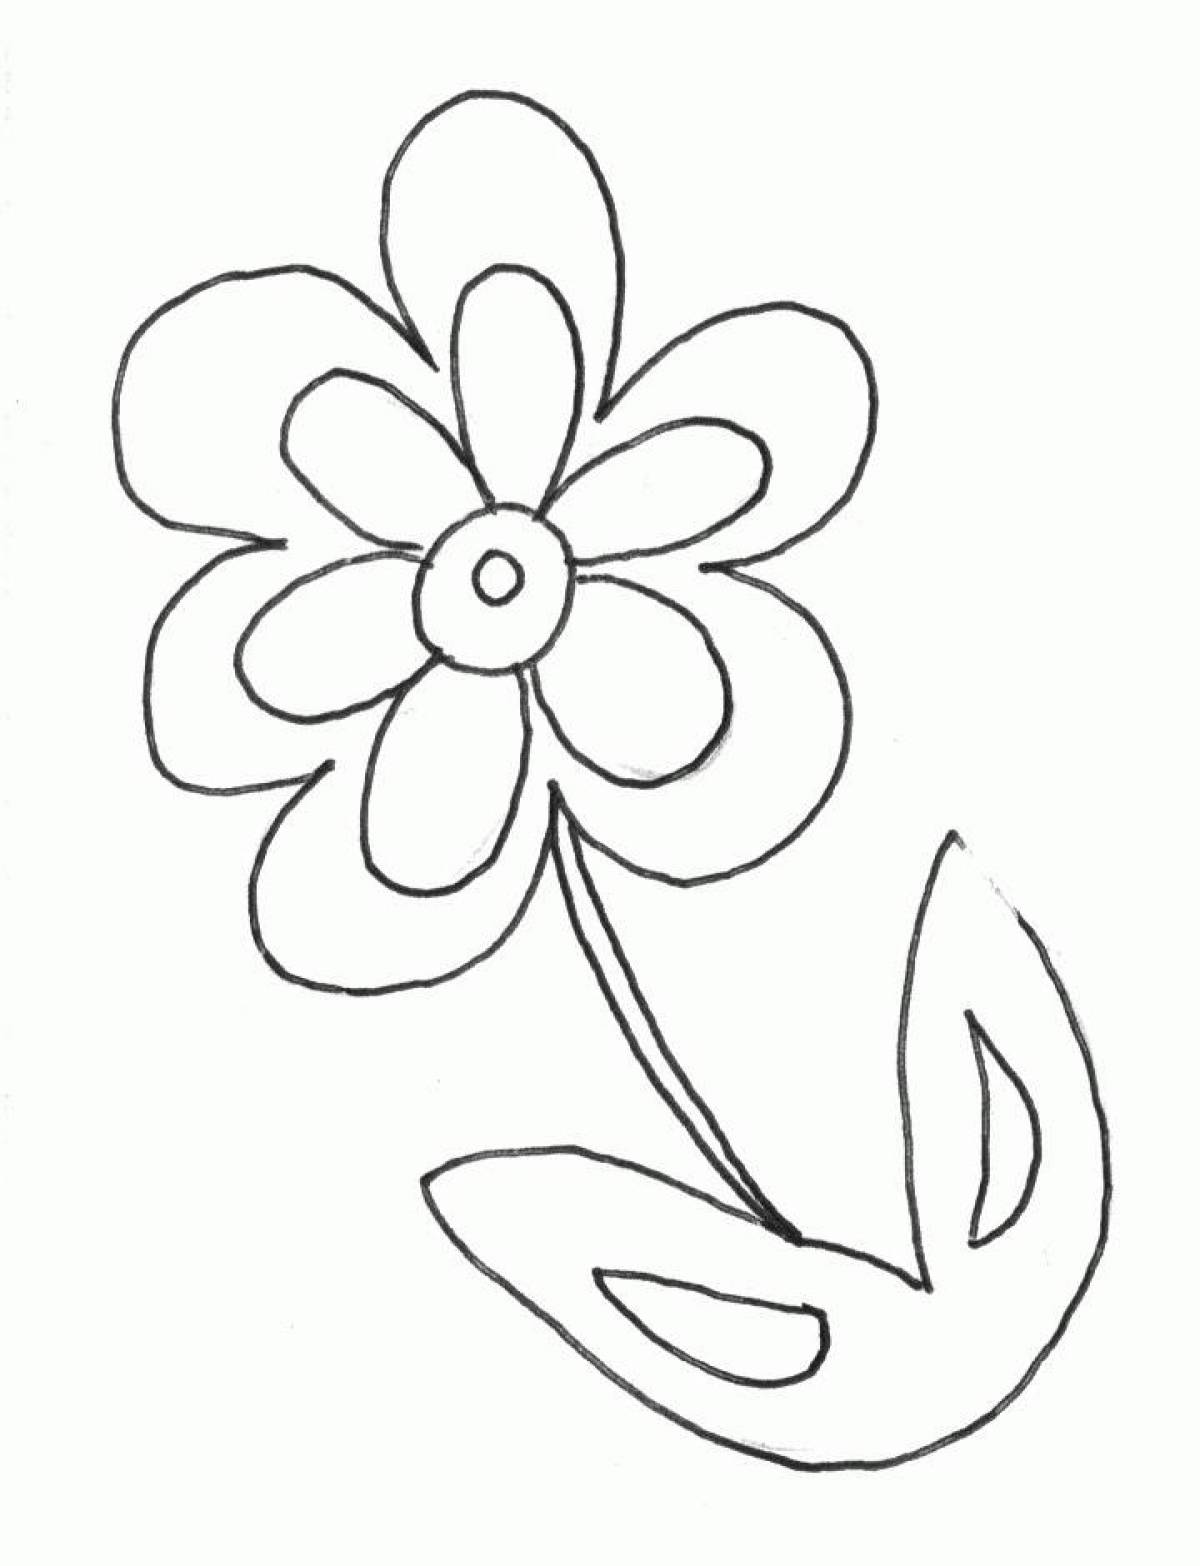 Adorable seven color flower coloring book for kids